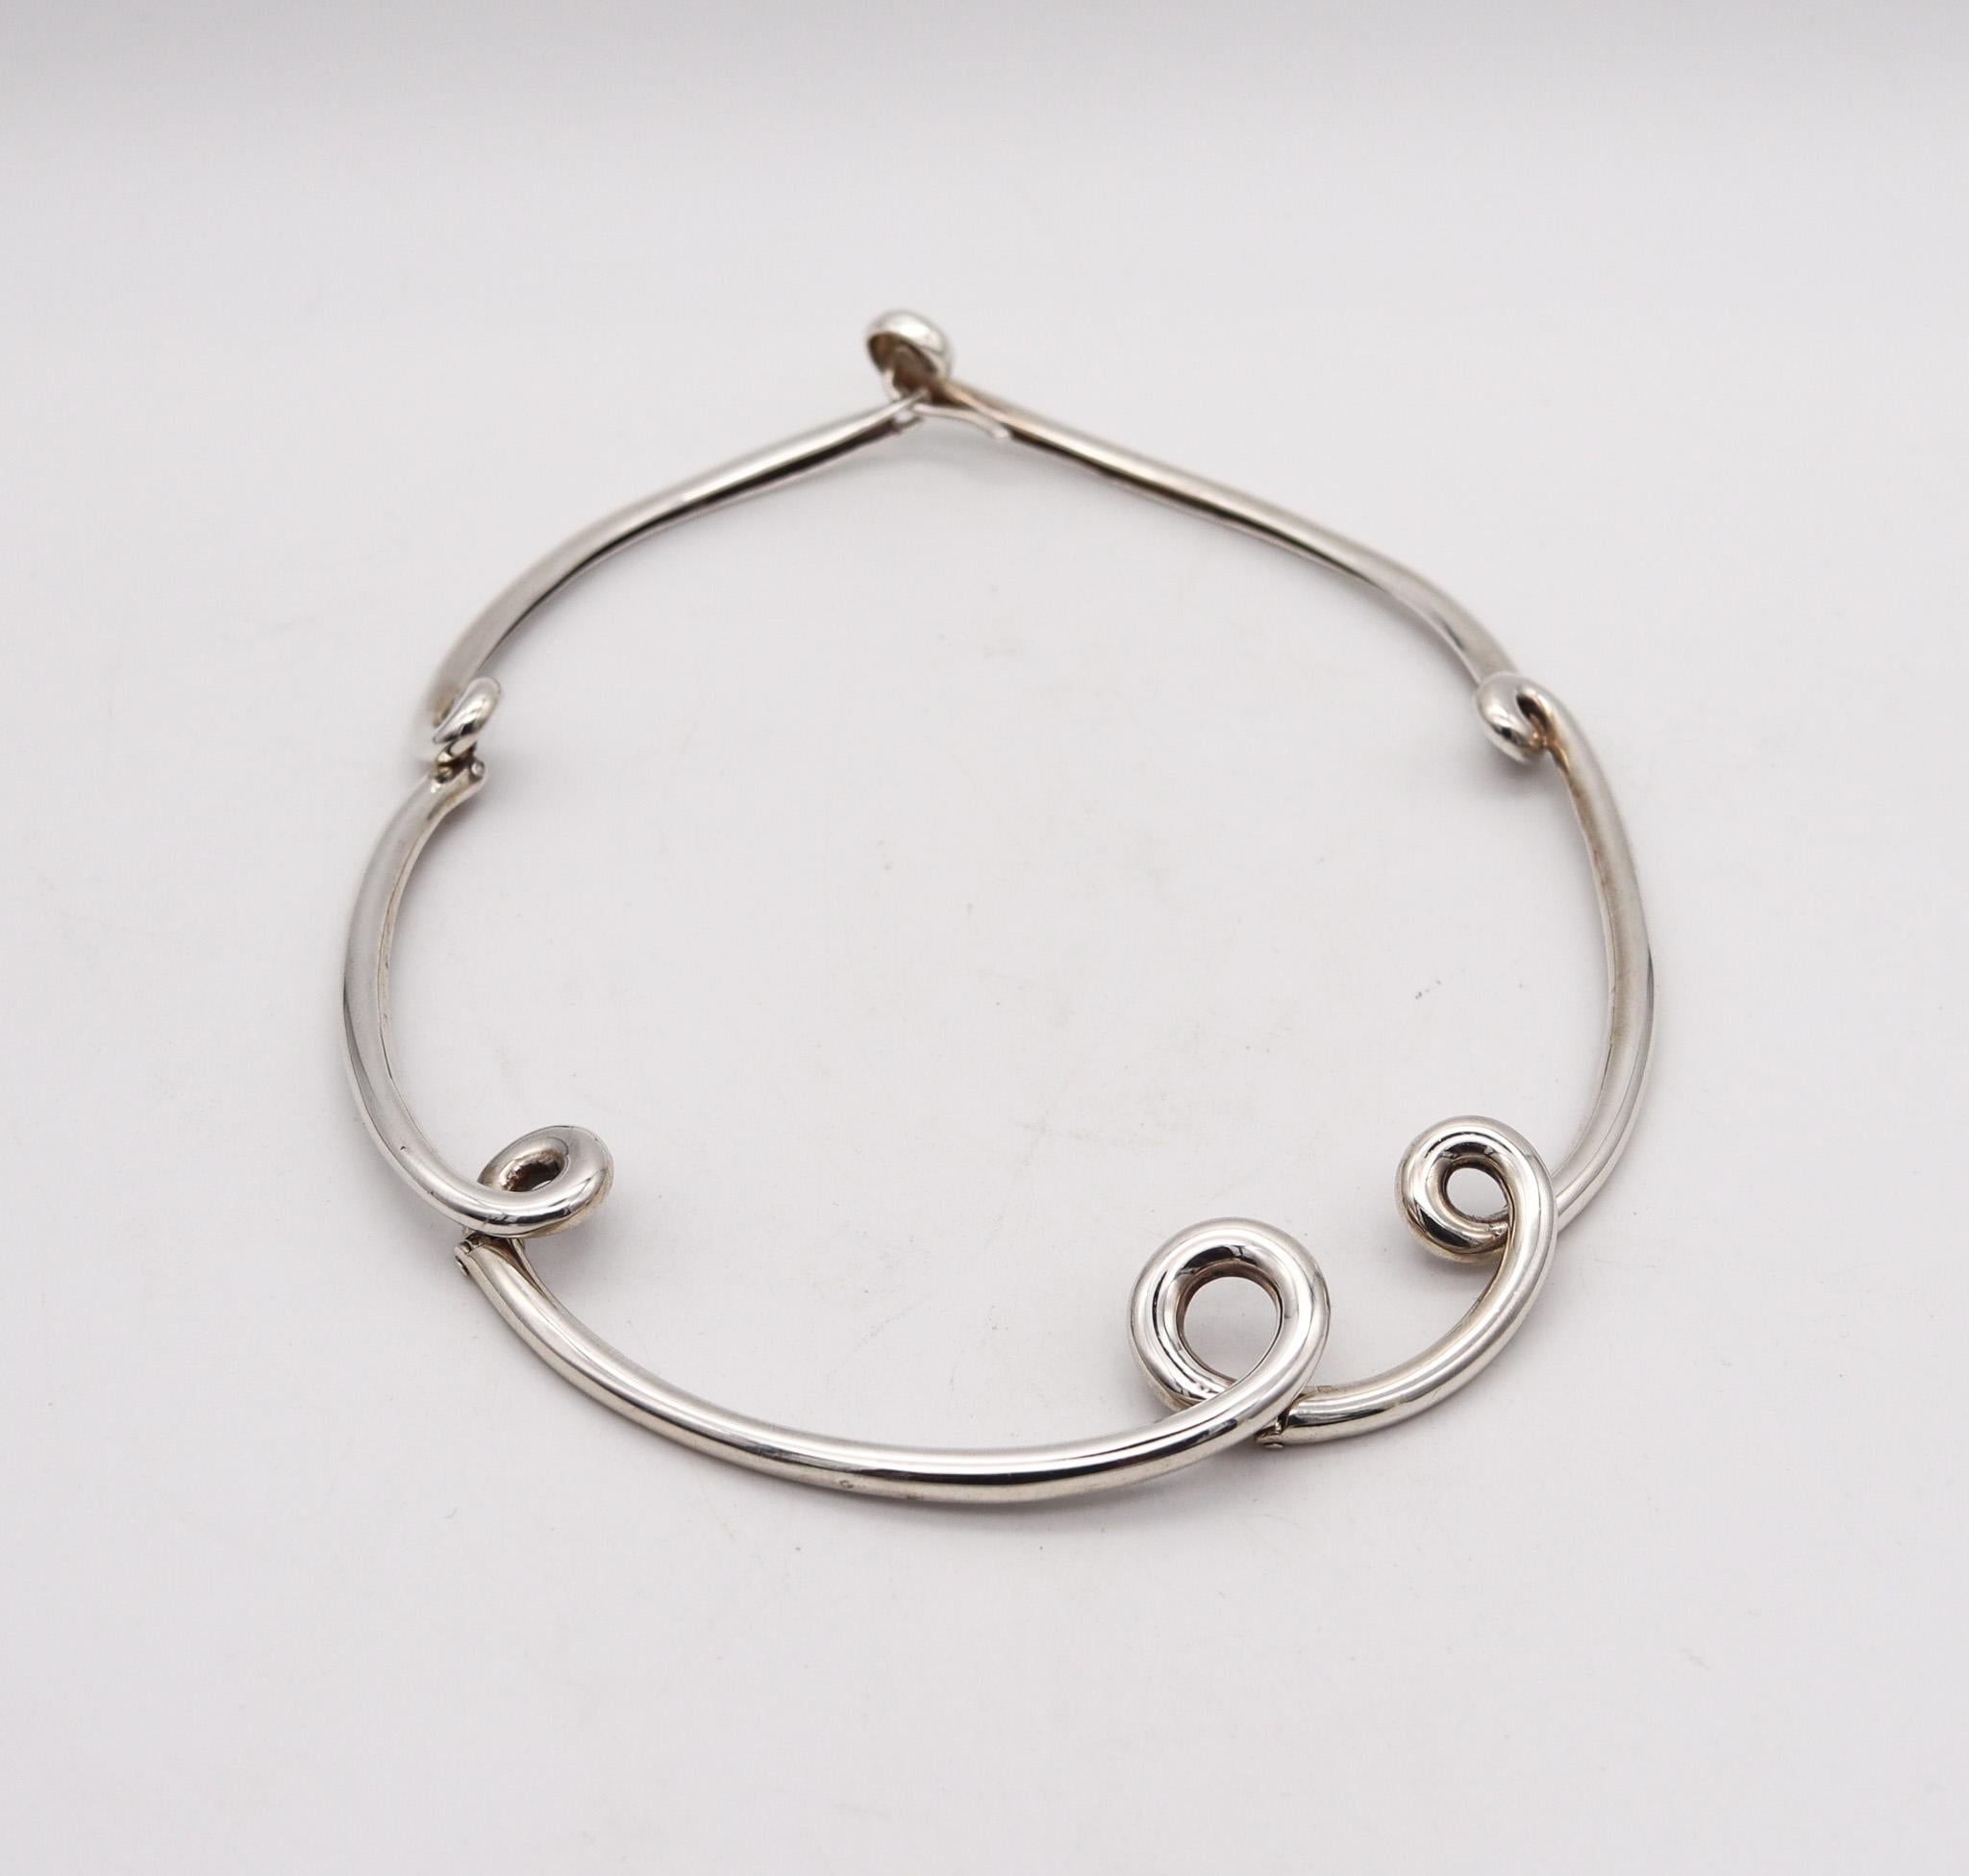 Modernist Angela Cummings 1991 Studio Twisted Free Form Necklace In .925 Sterling Silver For Sale